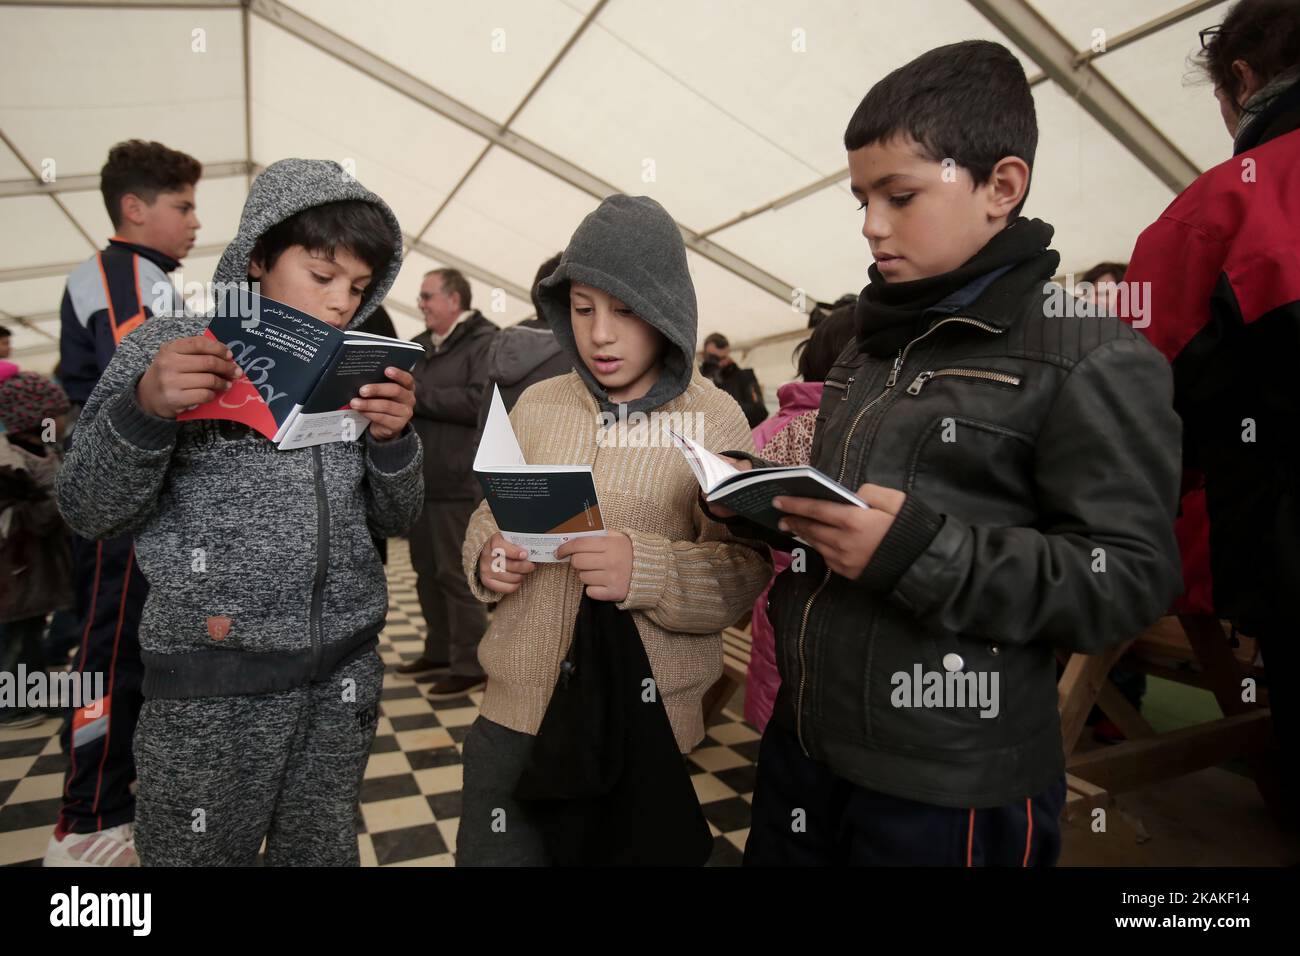 Children look at lexicons given by Greek Migration Minister and the Ambassador of Switzerland in Greece, at the Eleonas camp in Athens, on January 30, 2017. The mini lexicons, in six dialects (Arabic, Farsi, Sorani, French, Kirmantzi, Urdu) with translation in Greek and English, aim to communicate informations to migrants in Greece. (Photo by Panayotis Tzamaros/NurPhoto) *** Please Use Credit from Credit Field *** Stock Photo